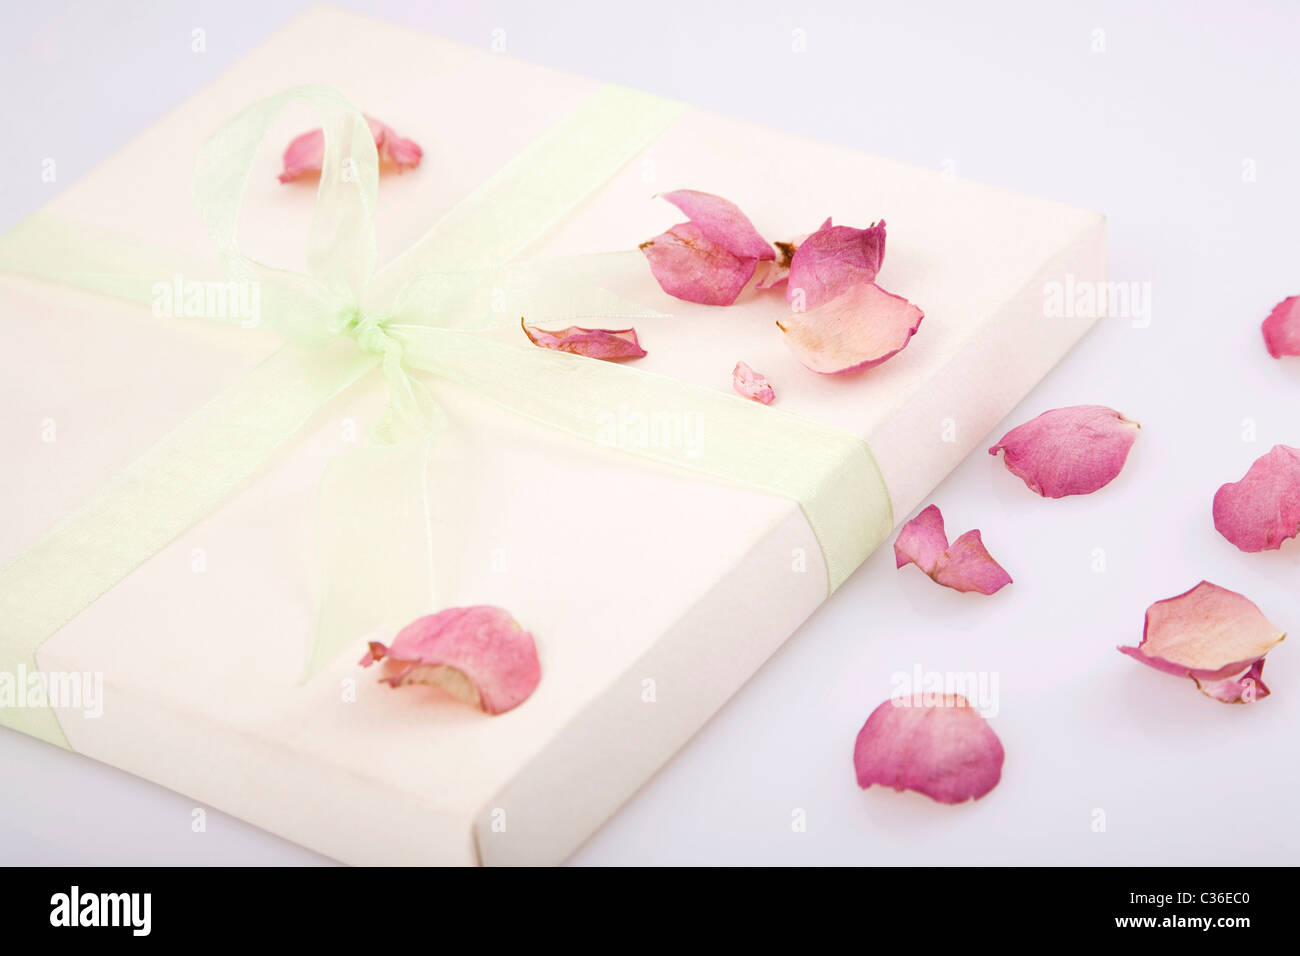 present box with rose petals on white background Stock Photo